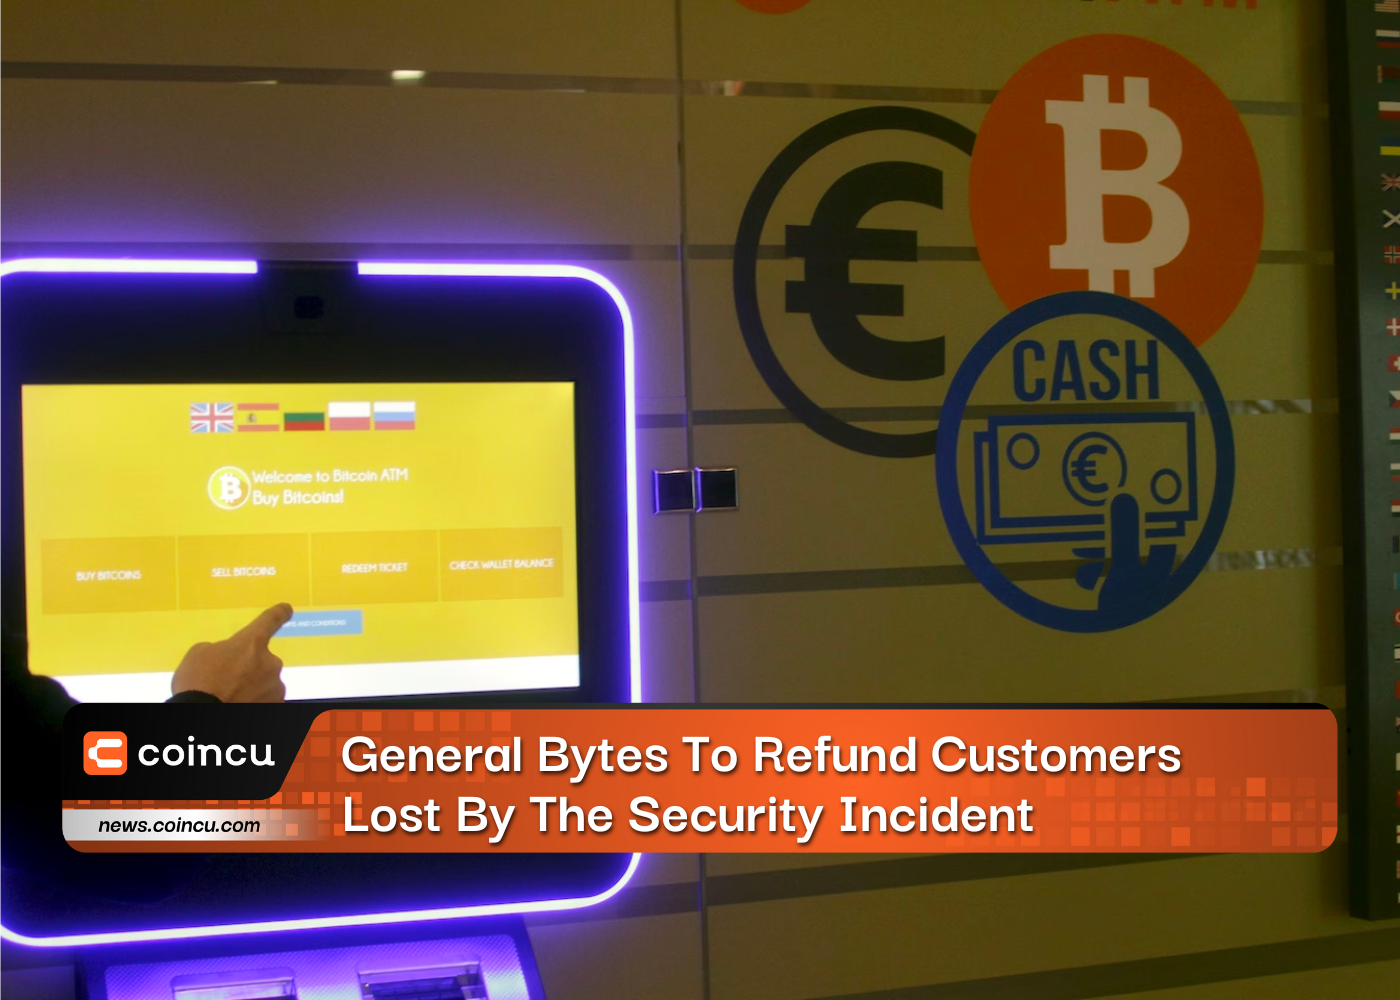 General Bytes To Refund Customers Lost By The Security Incident